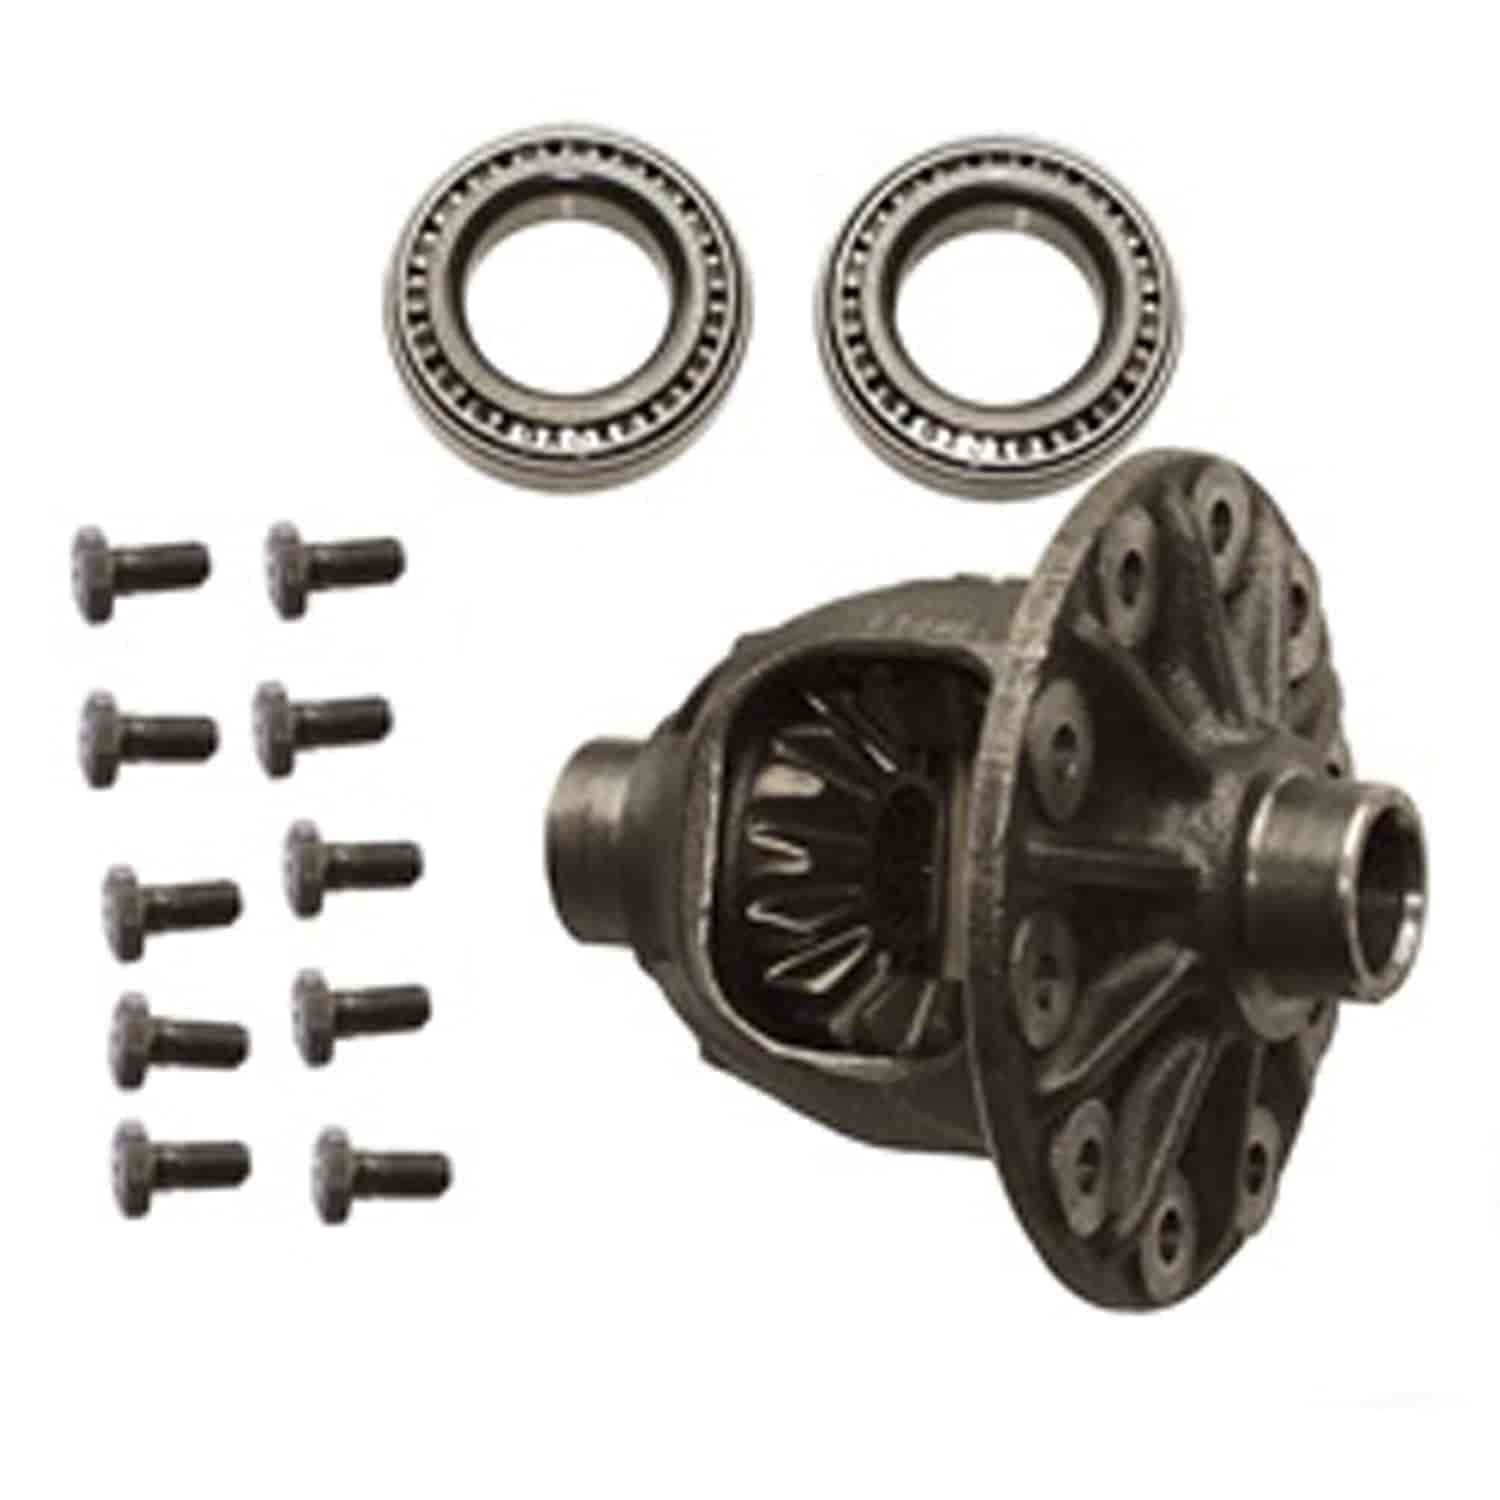 This differential case assembly from Omix-ADA fits the Dana Super 30 front axle in 02-07 Jeep Libert